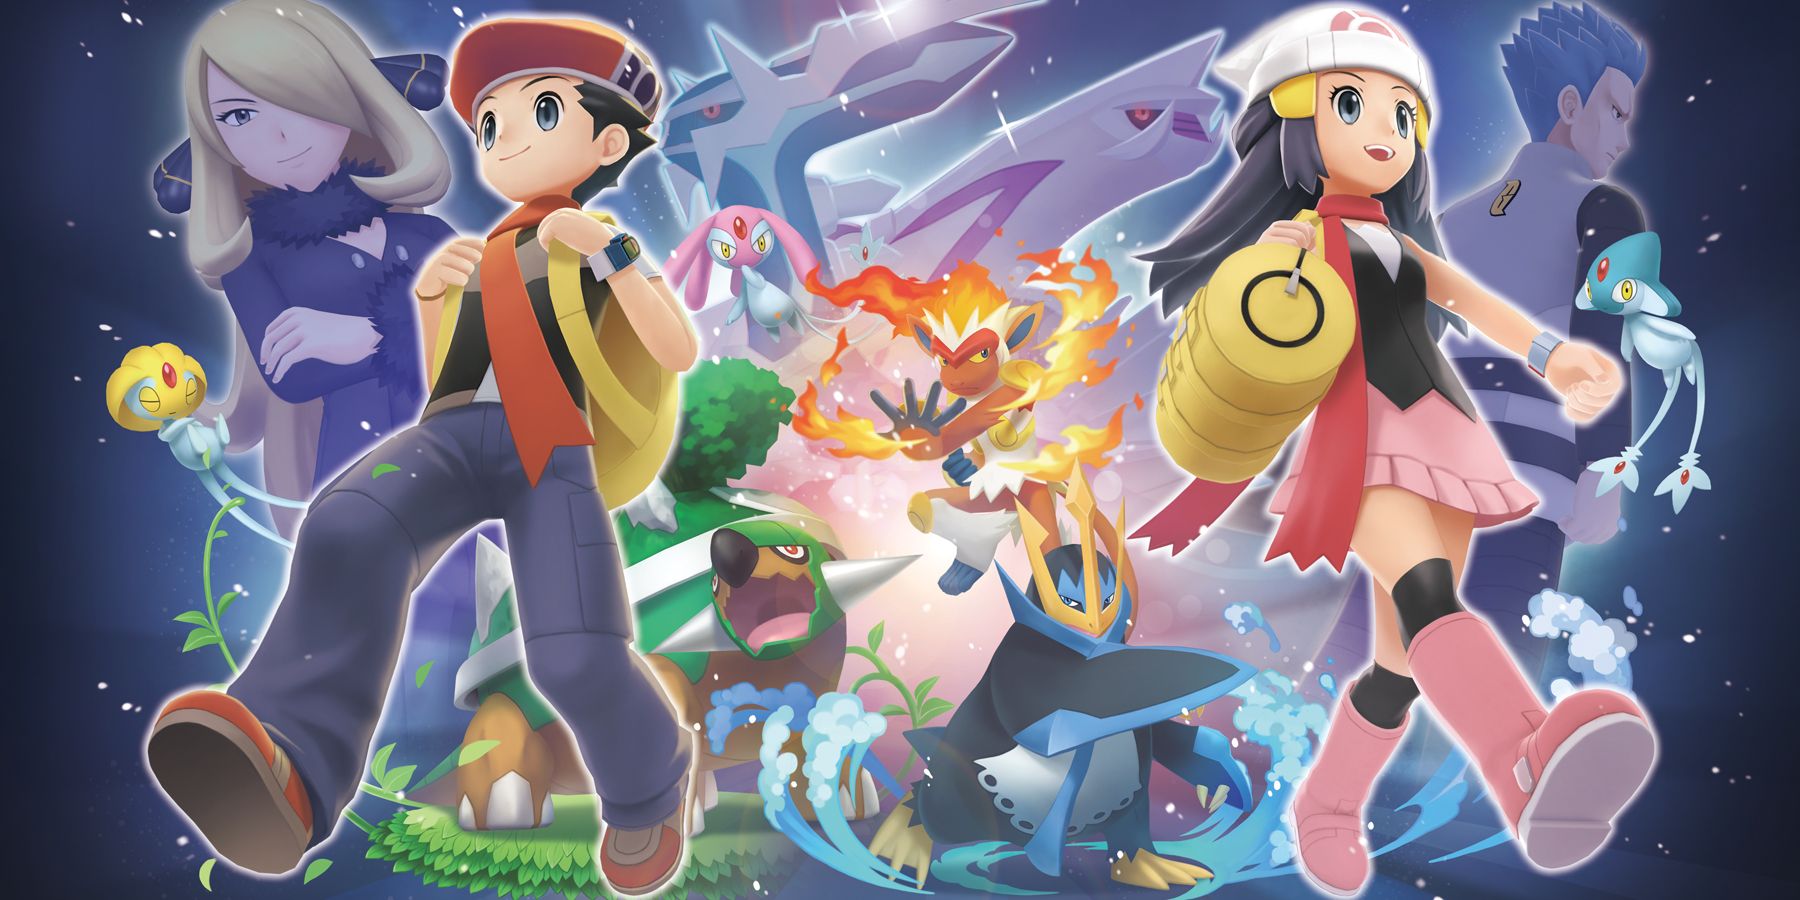 Art for Pokemon Brilliant Diamond and Shining Pearl depicting the player characters along with different Pokemon and the Elite Four Champion on the left and Leader of Team Galactic on the right.